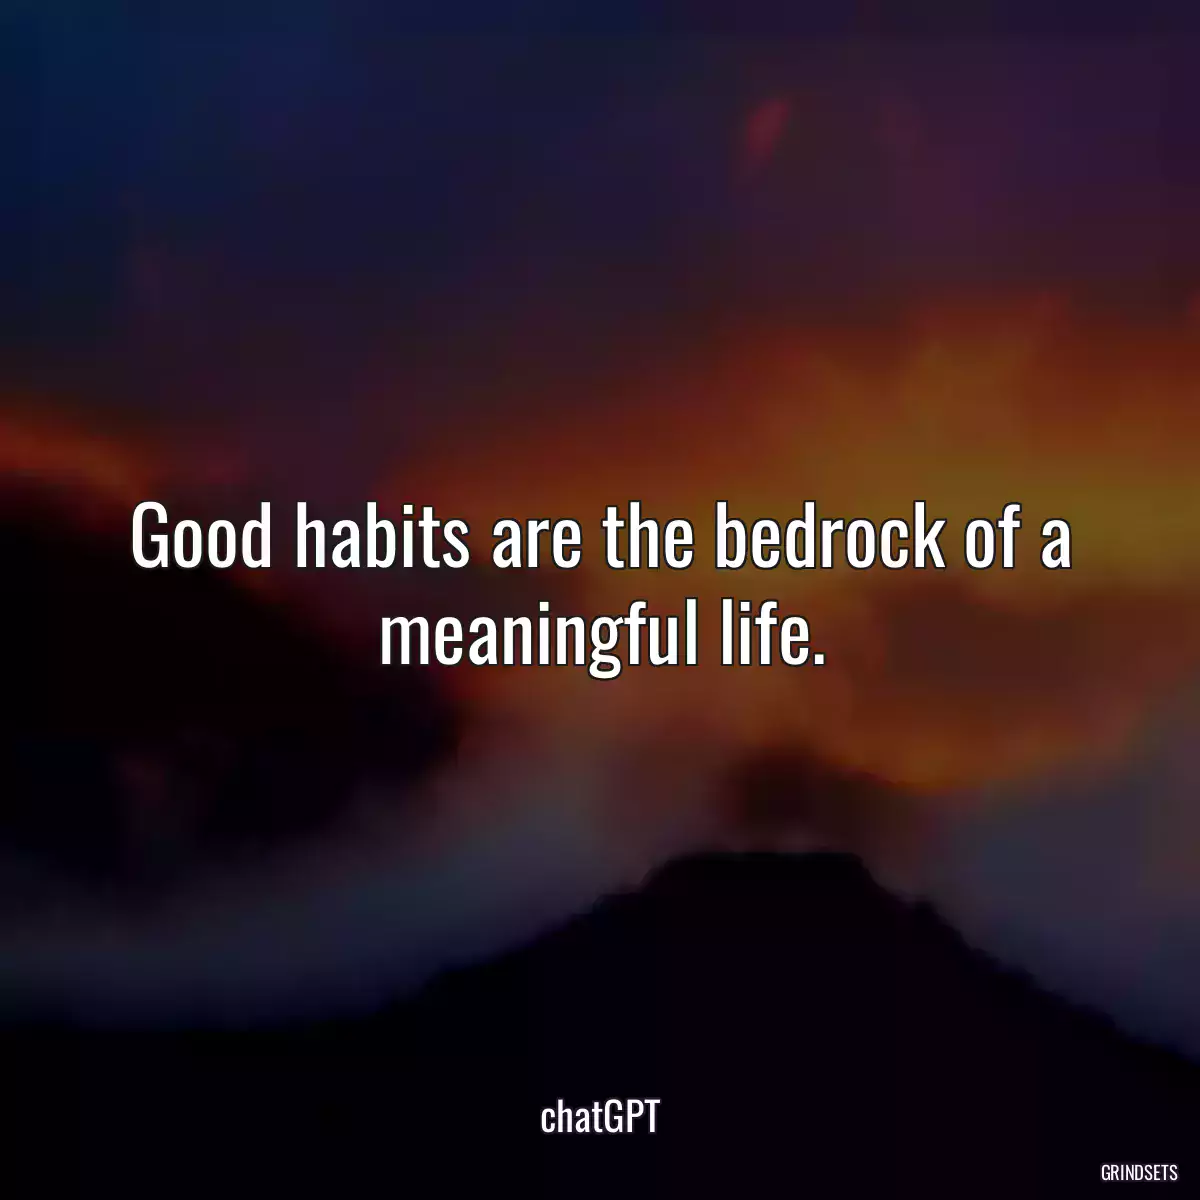 Good habits are the bedrock of a meaningful life.